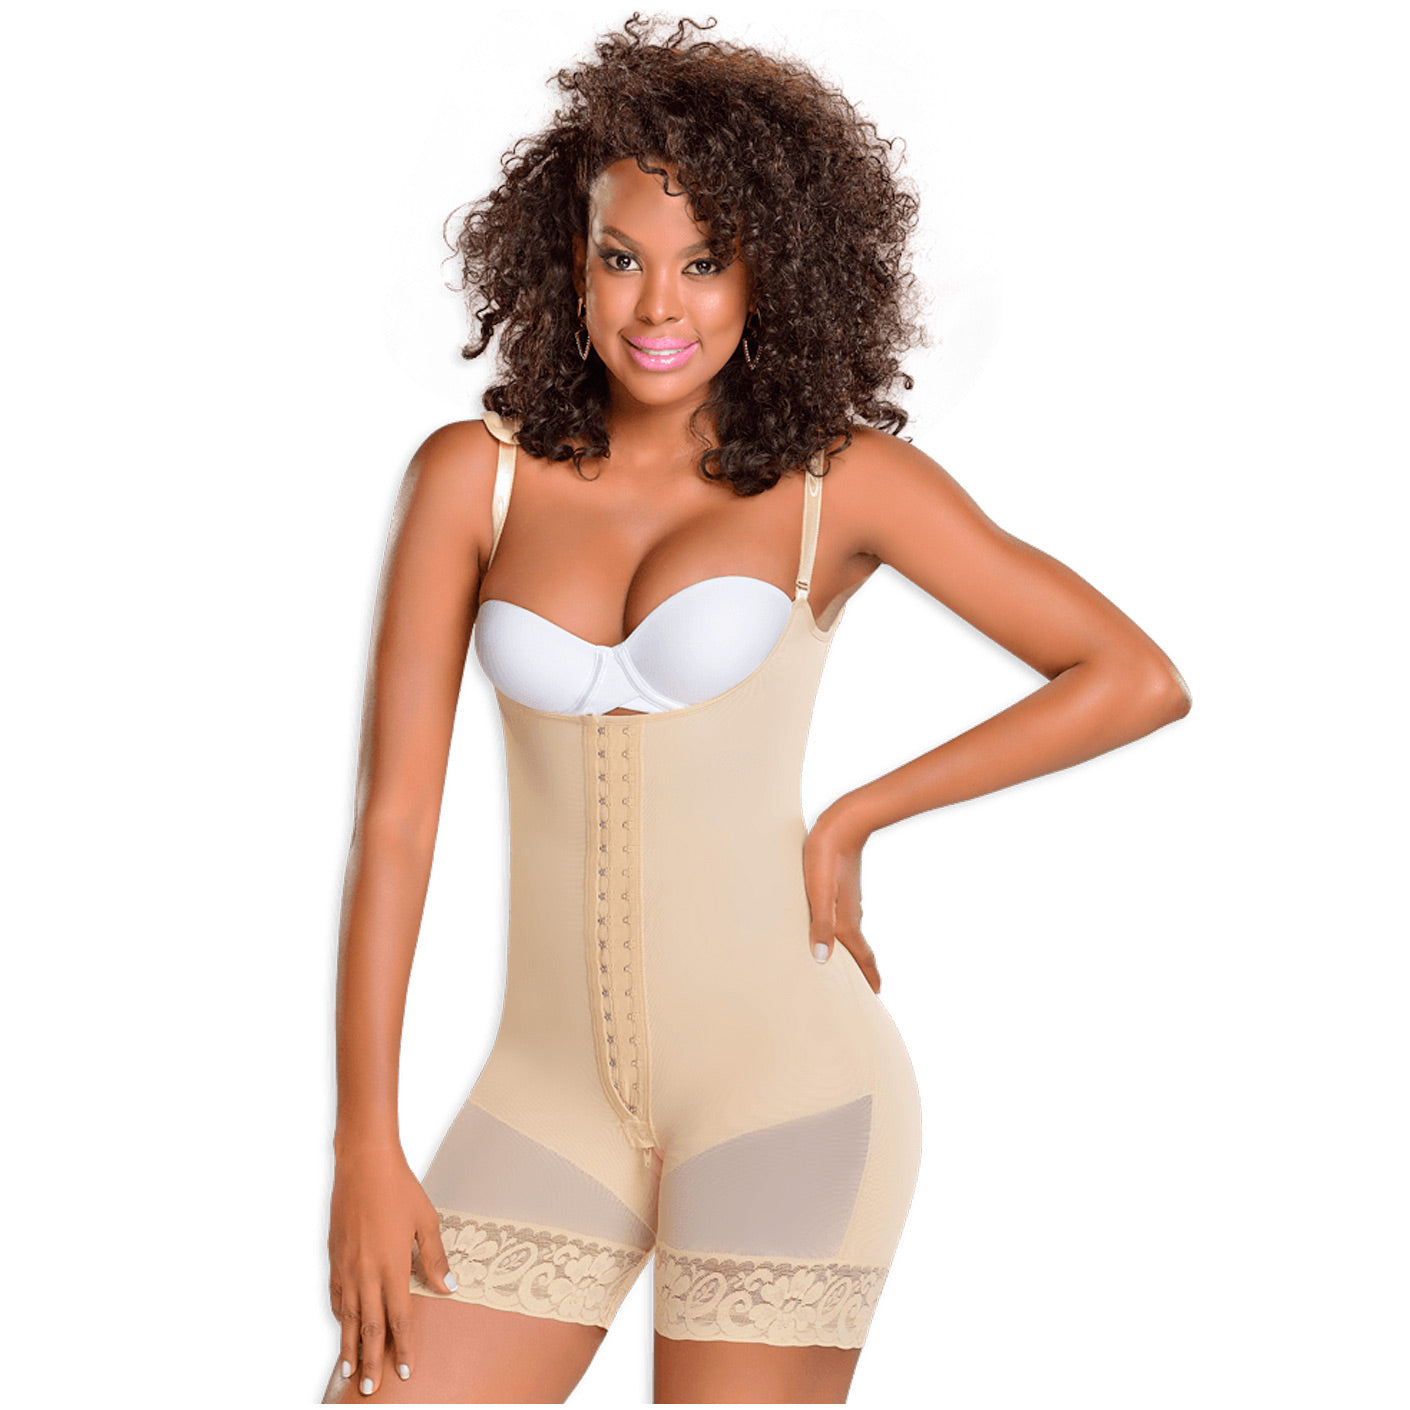 Best TUMMY CONTROL Full Body Shaper AFTER SURGERY M&D 0161 